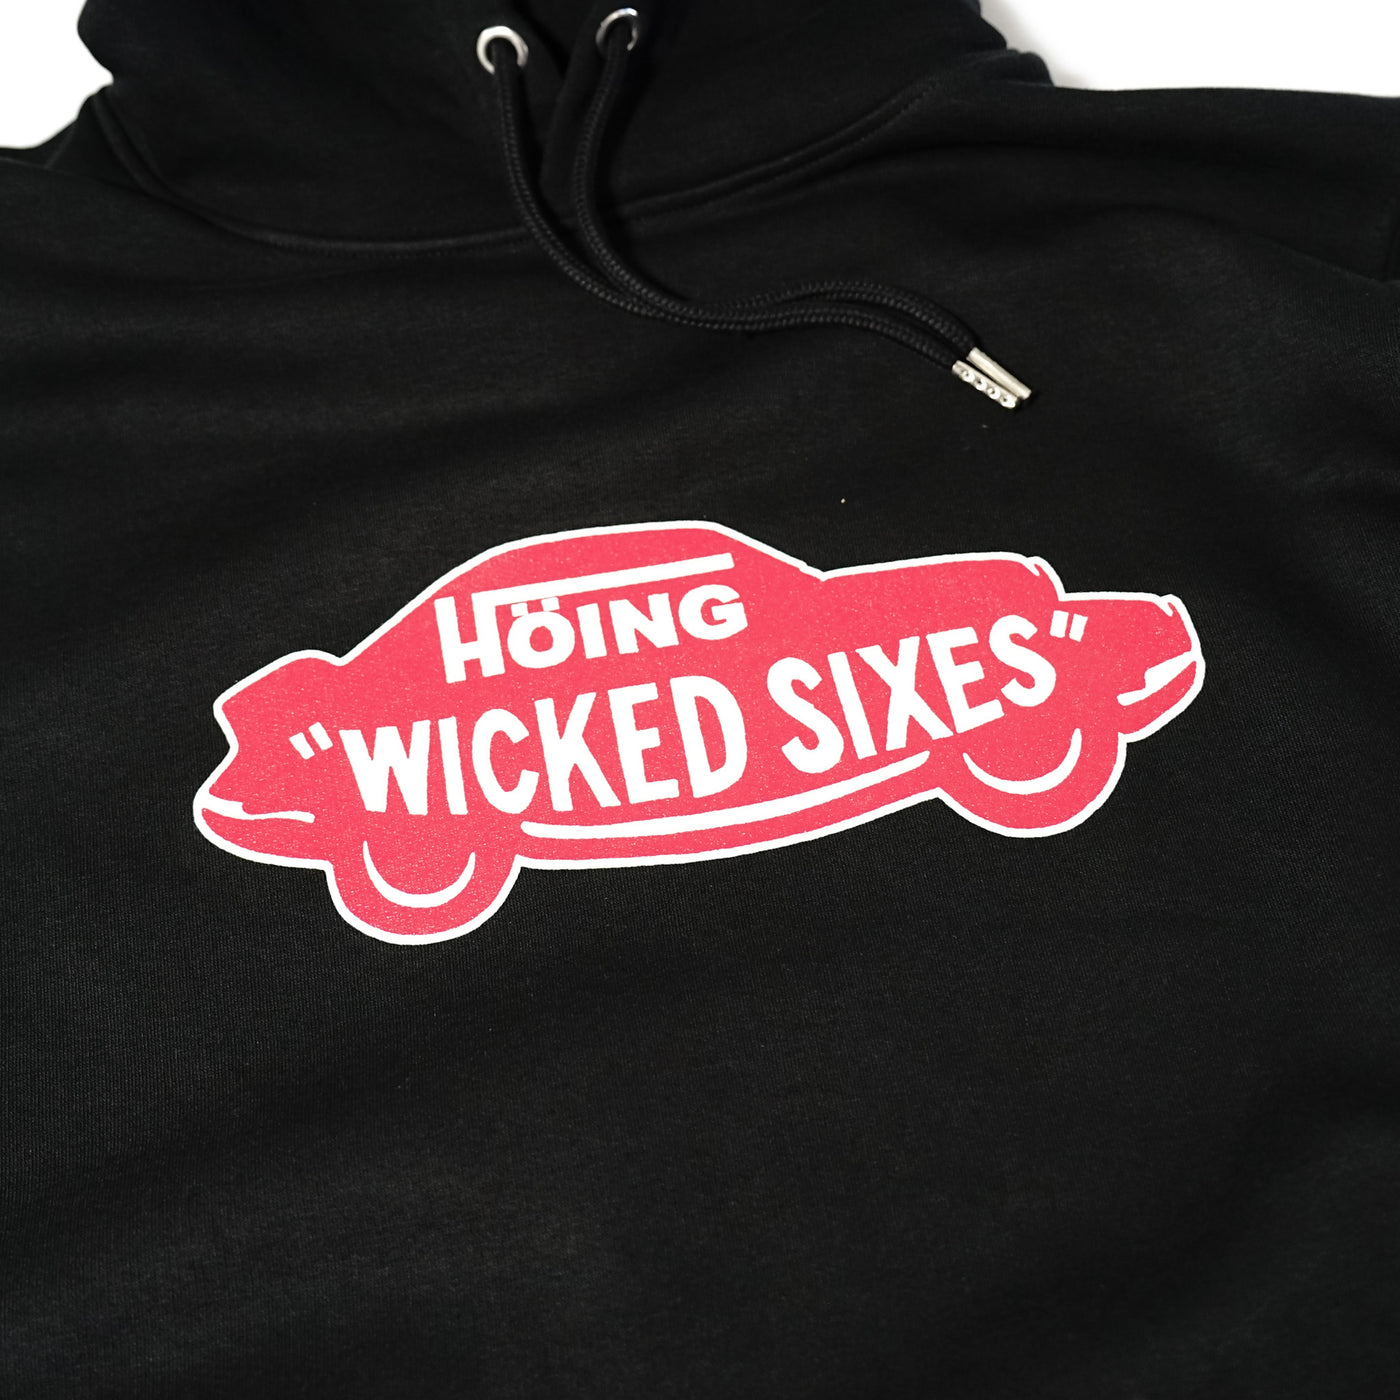 Höing Wicked Sixes "Off The Wall" Hoodie